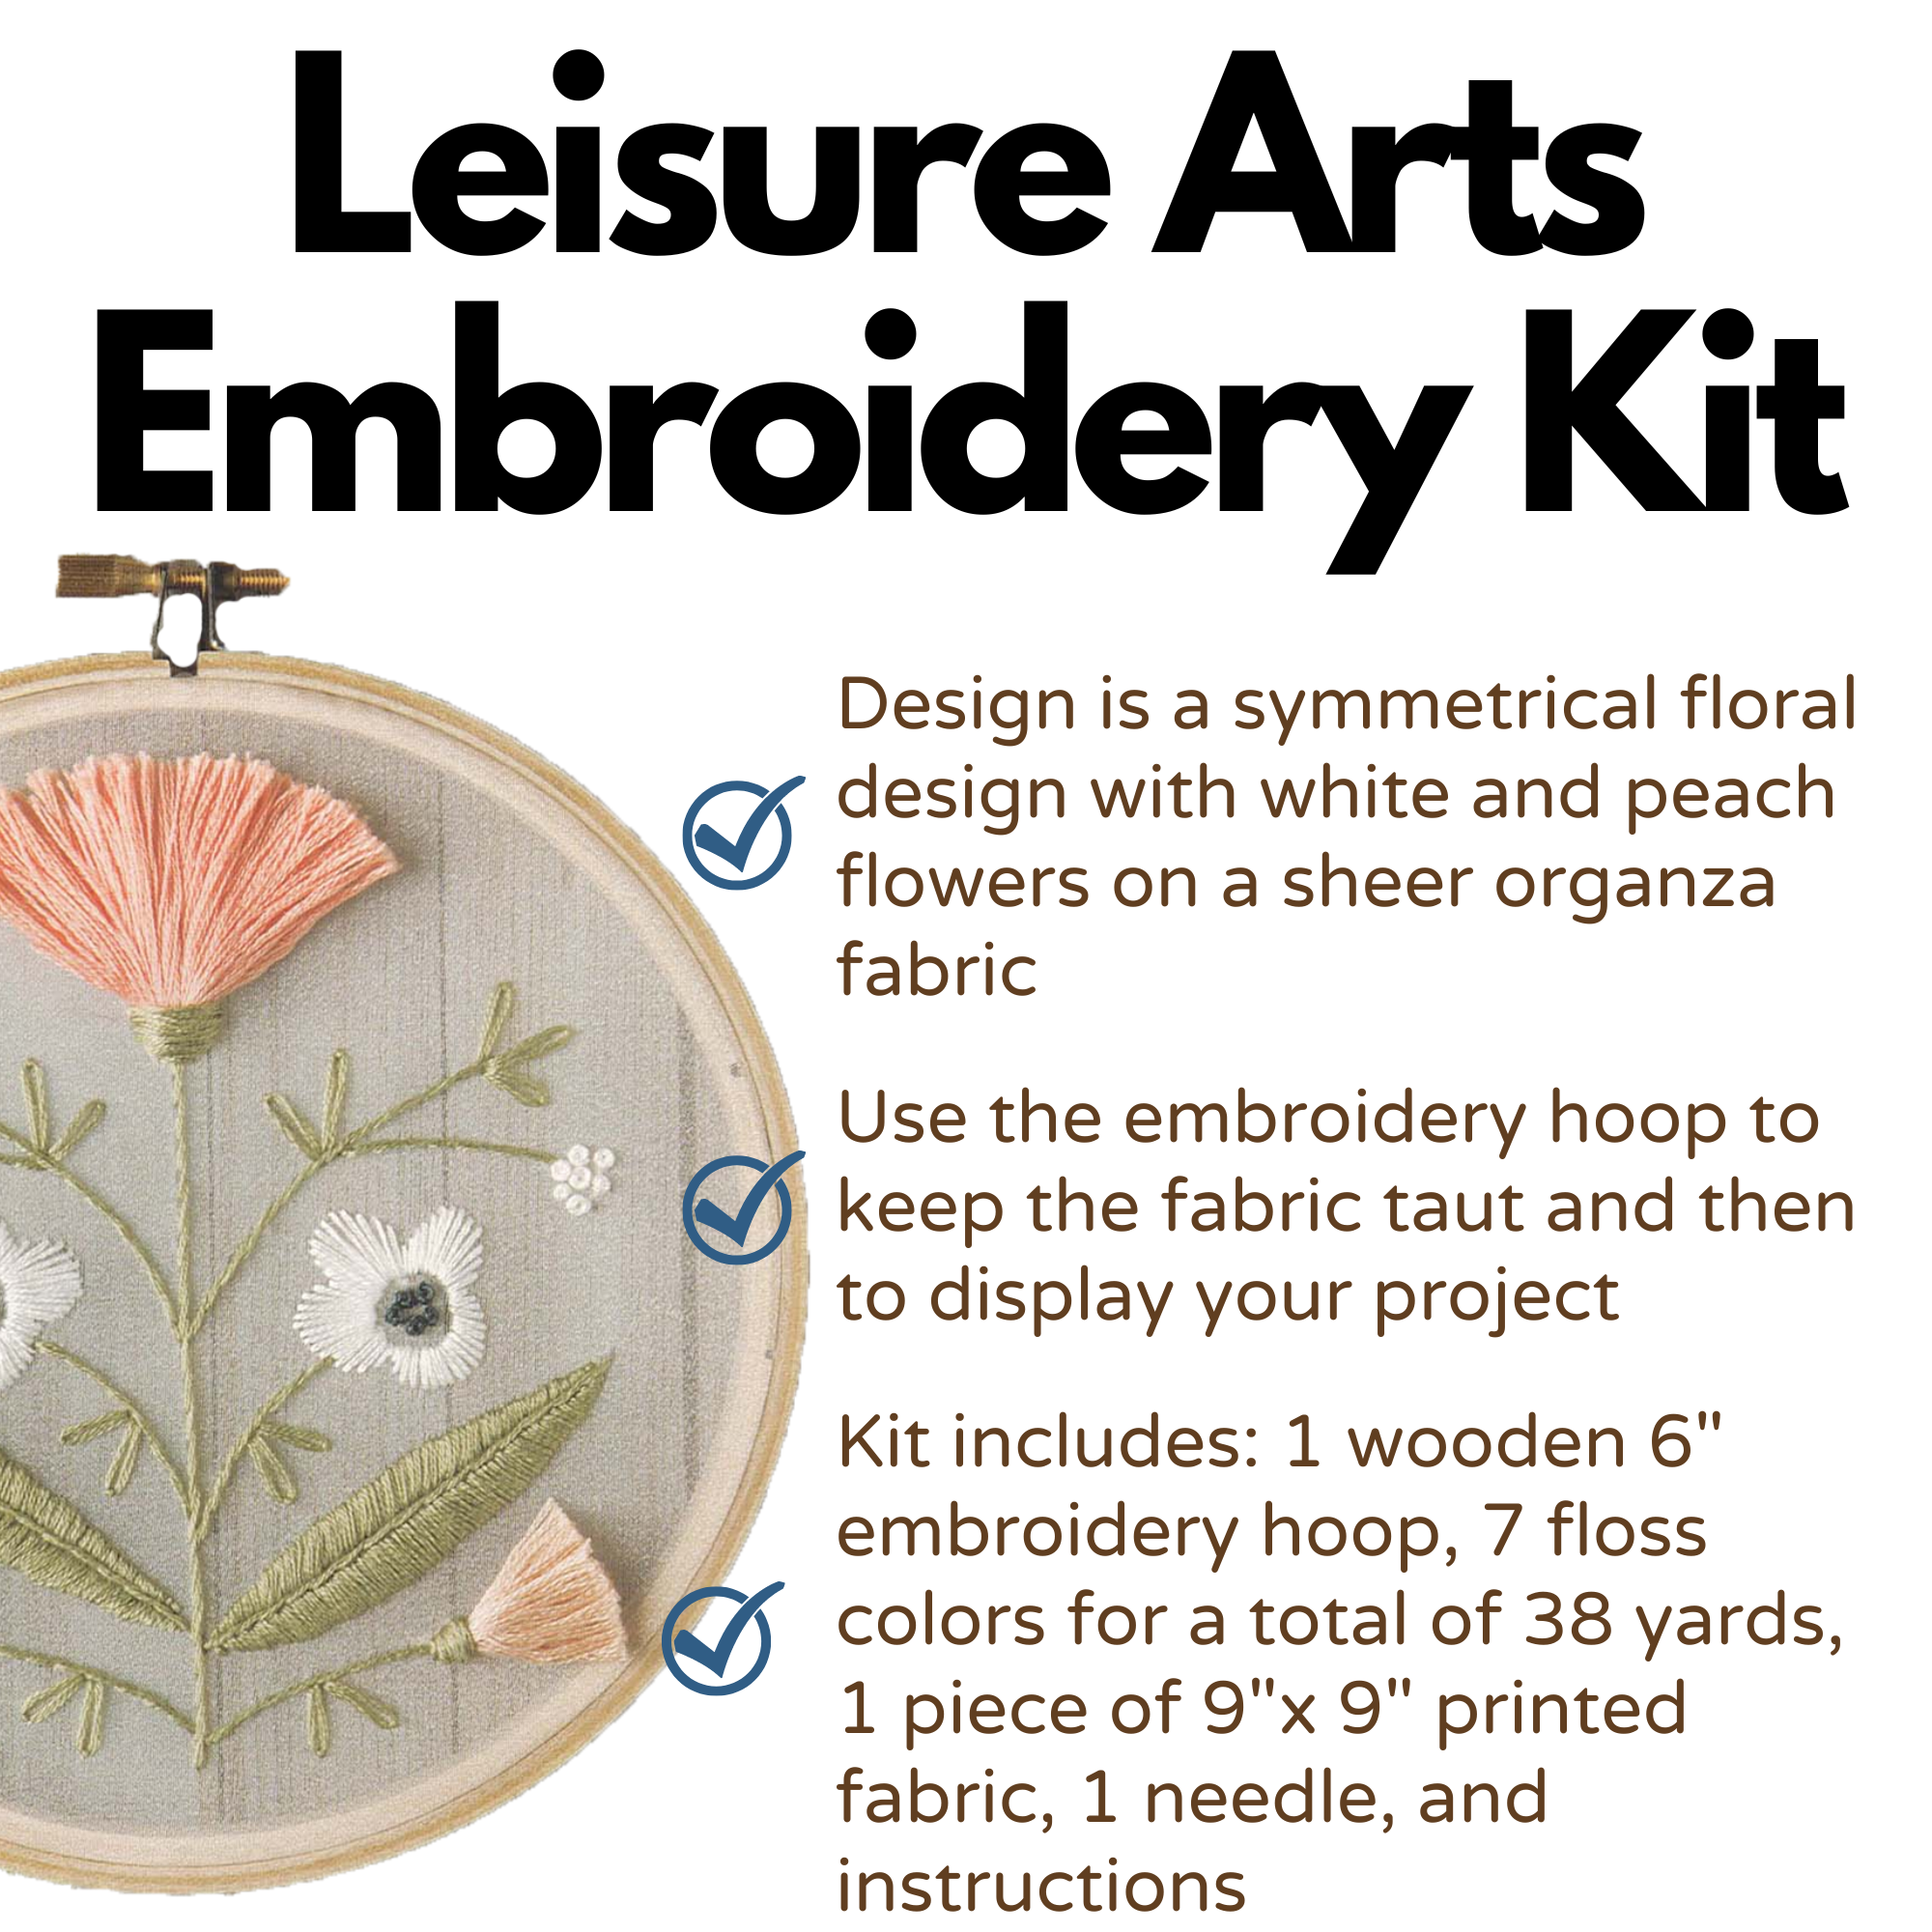 Leisure Arts Embroidery Kit 6 Desert Flower - embroidery kit for